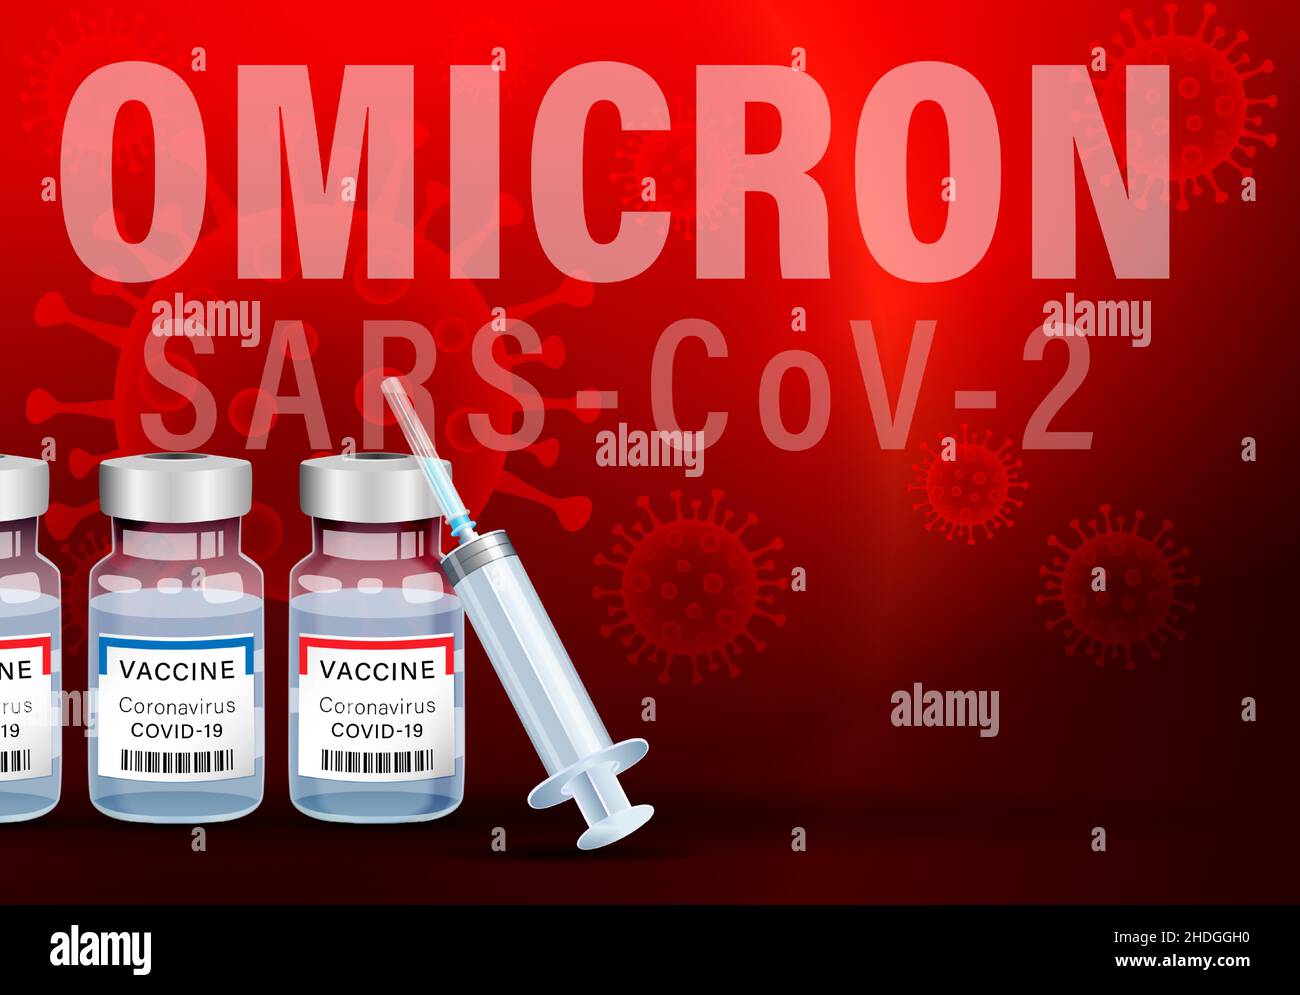 Omicron COVID-19 vaccine bottles and syringe, web banner. Covid vaccines have to be updated for new SARS-CoV-2 (B.1.1.529). Text Omicron and red virus Stock Vector